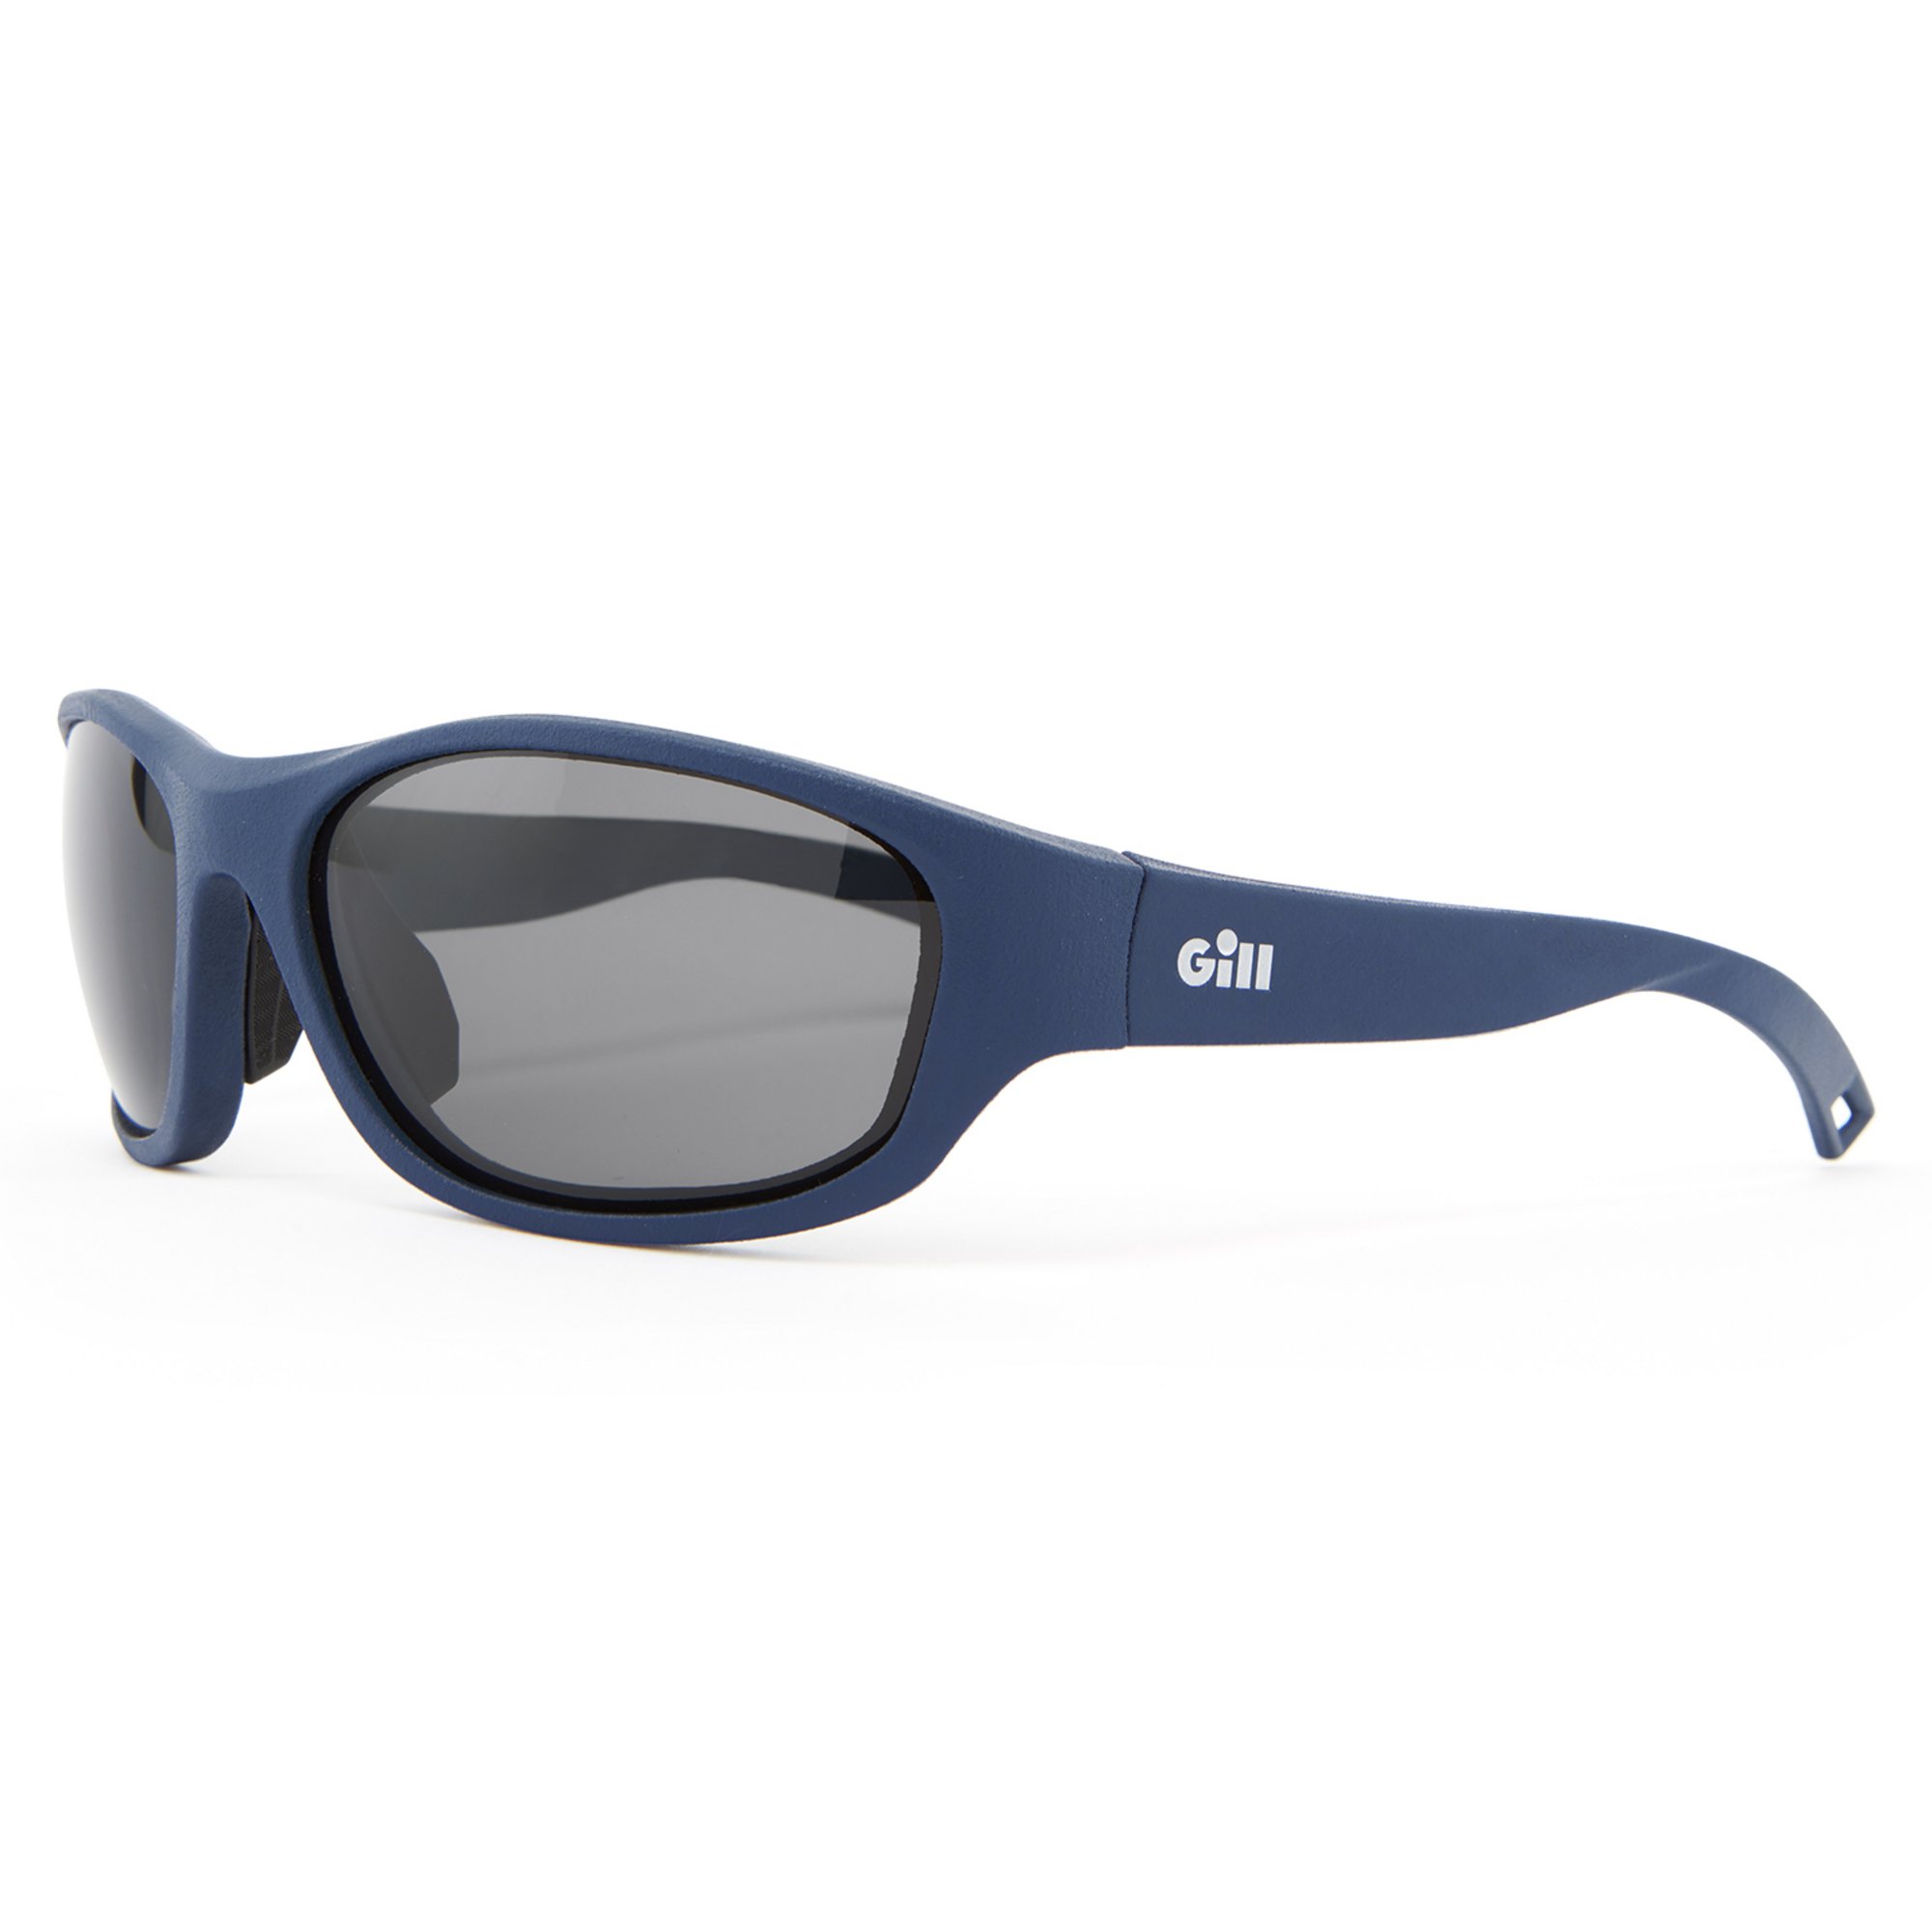 2023 Gill Classic Floating Watersports Sunglasses - Blue 9745